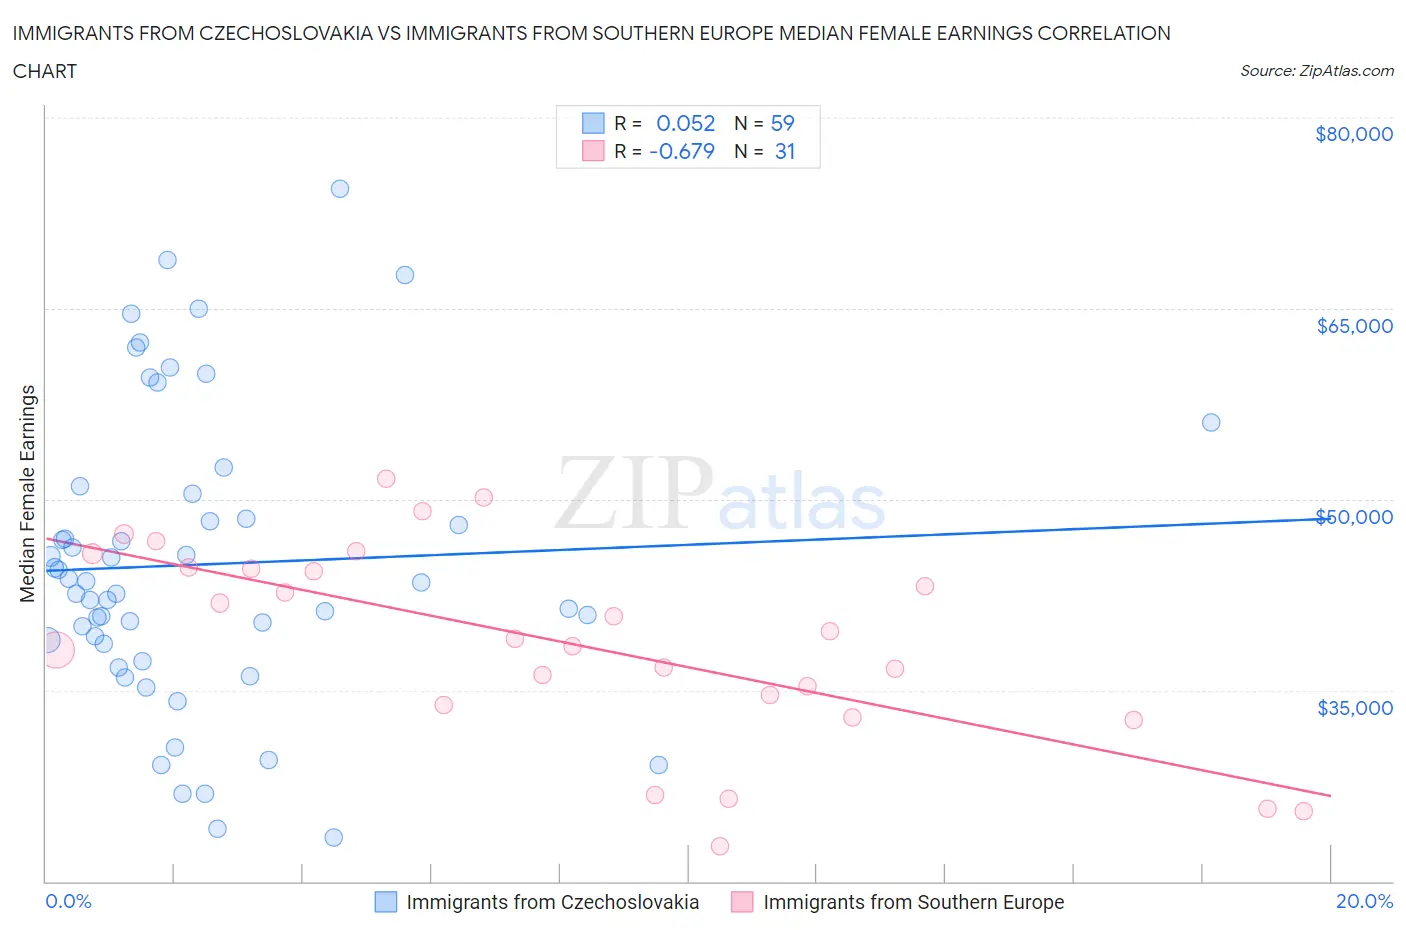 Immigrants from Czechoslovakia vs Immigrants from Southern Europe Median Female Earnings